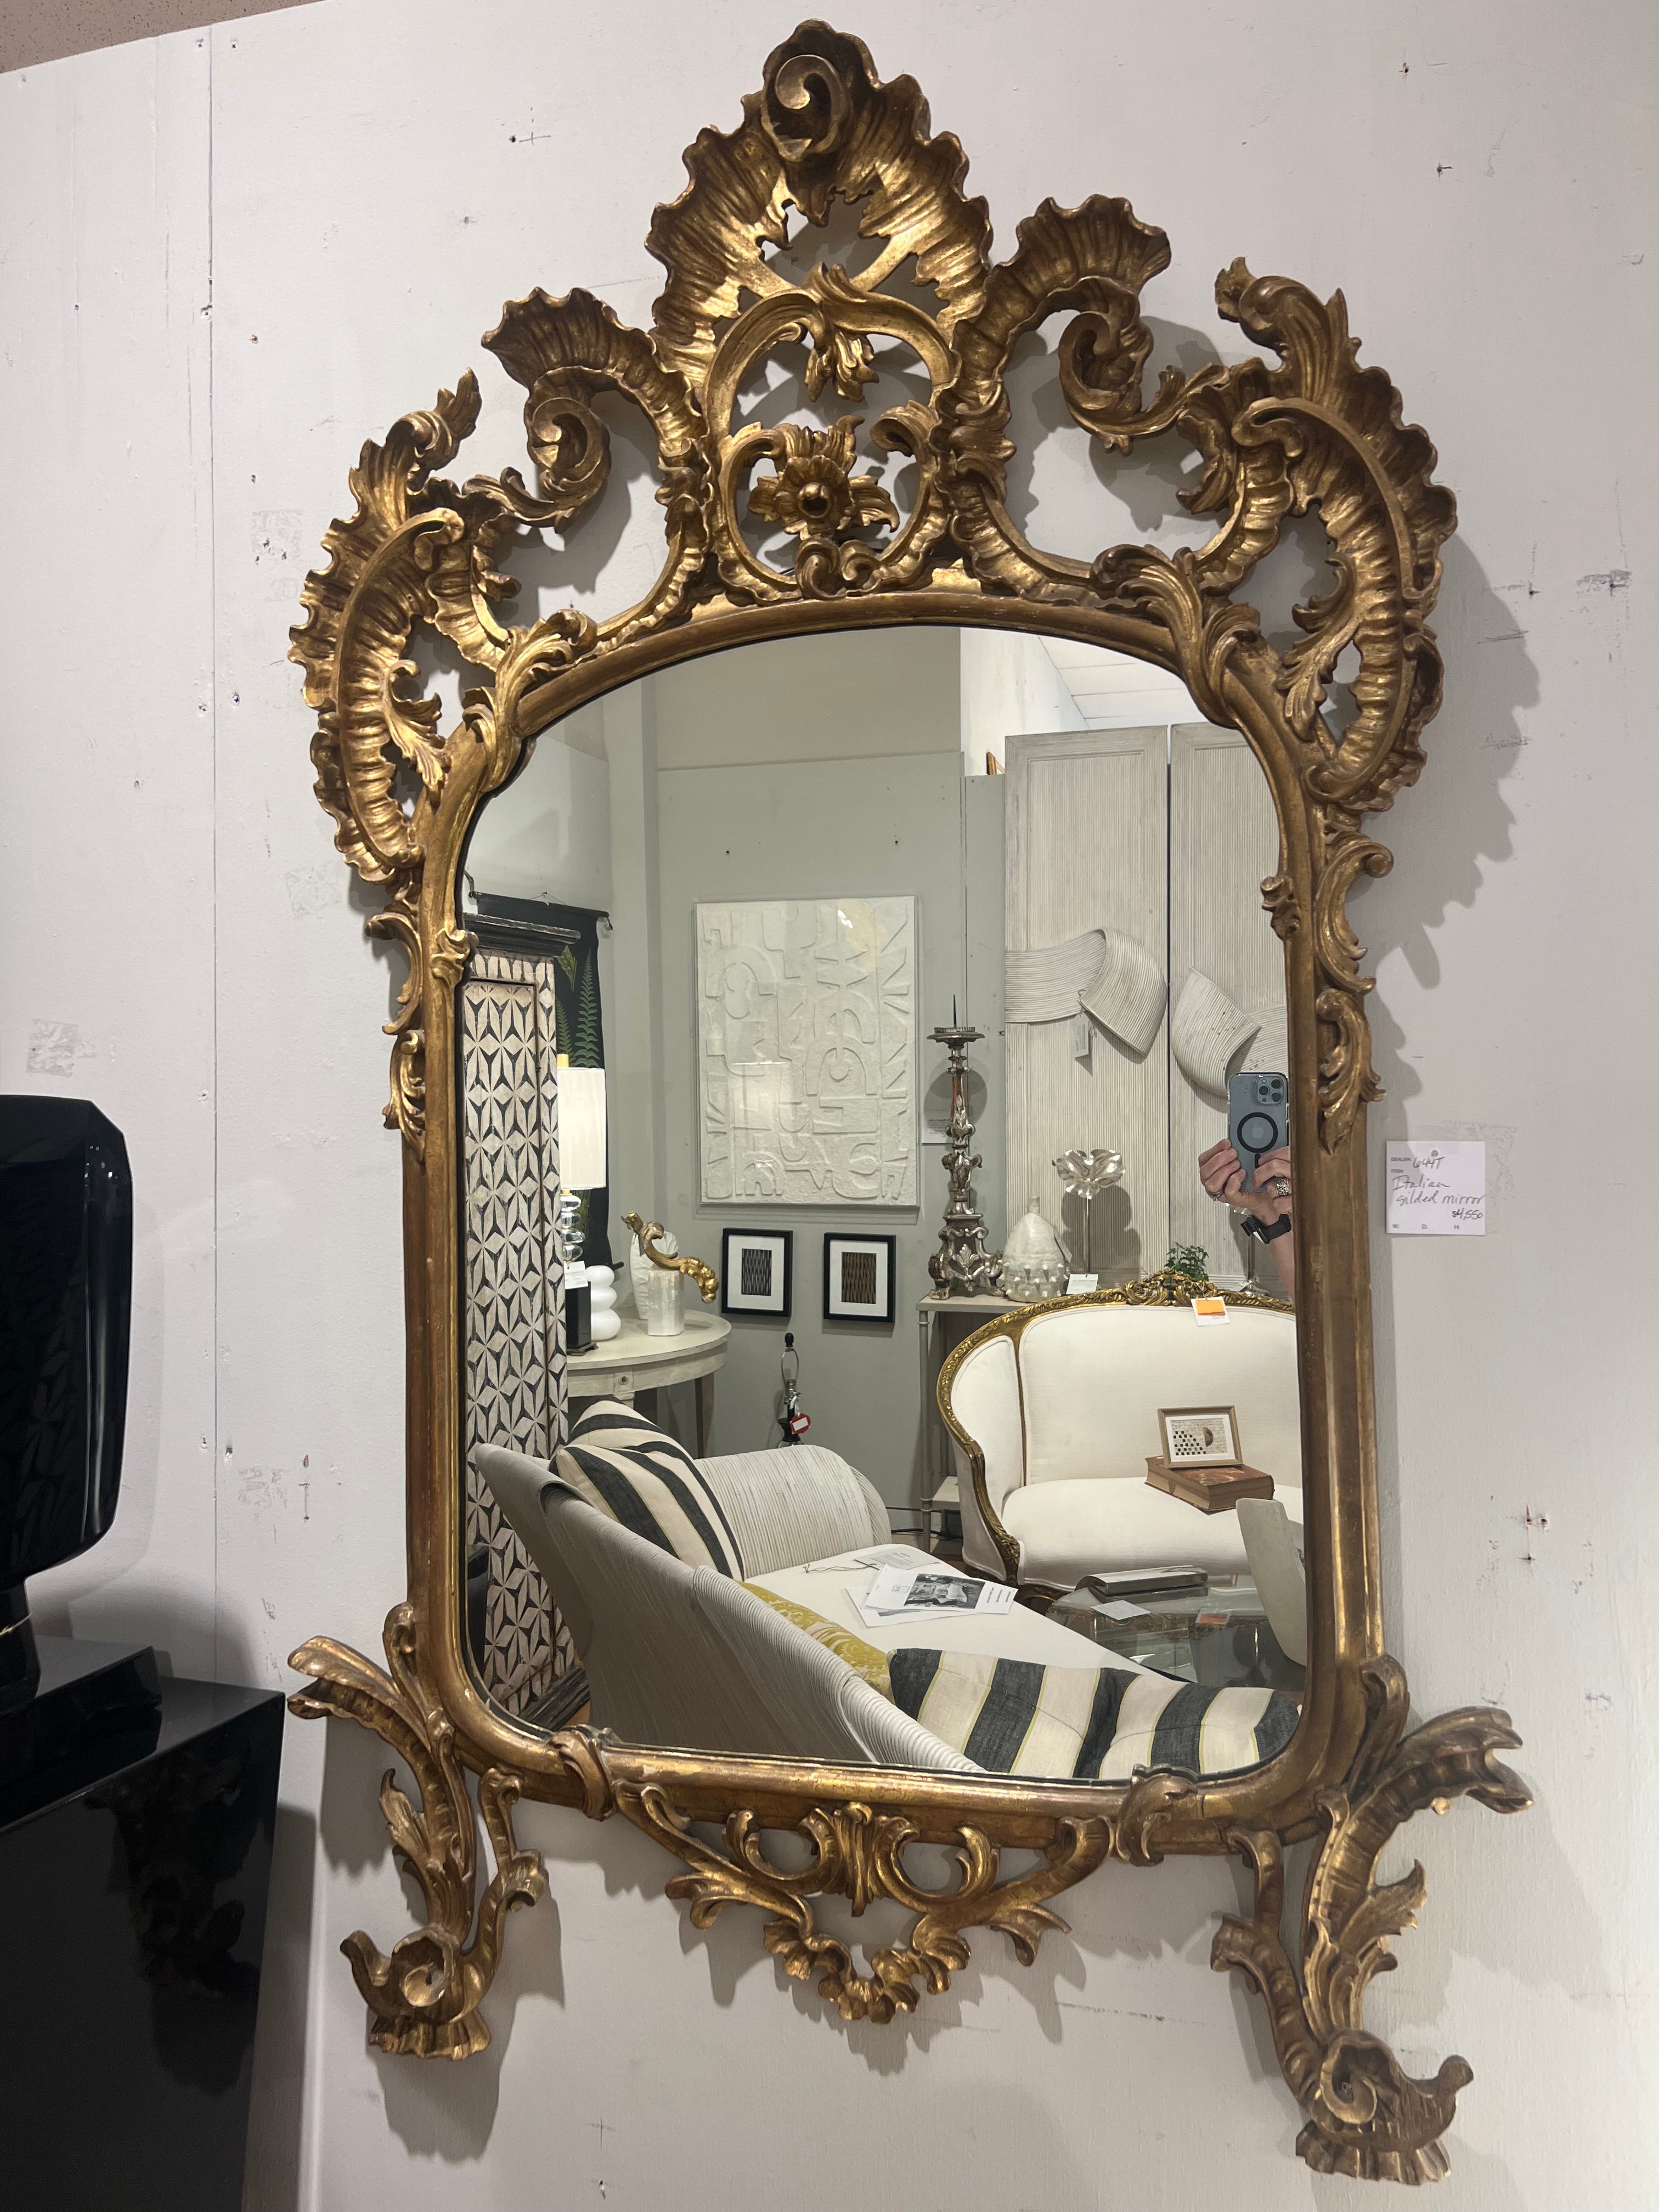 Italian gilt wood Belle Époque mirror. This richly hand carved mirror from the nineteenth century will be a striking accessory to any sophisticated room setting. It has minimal 